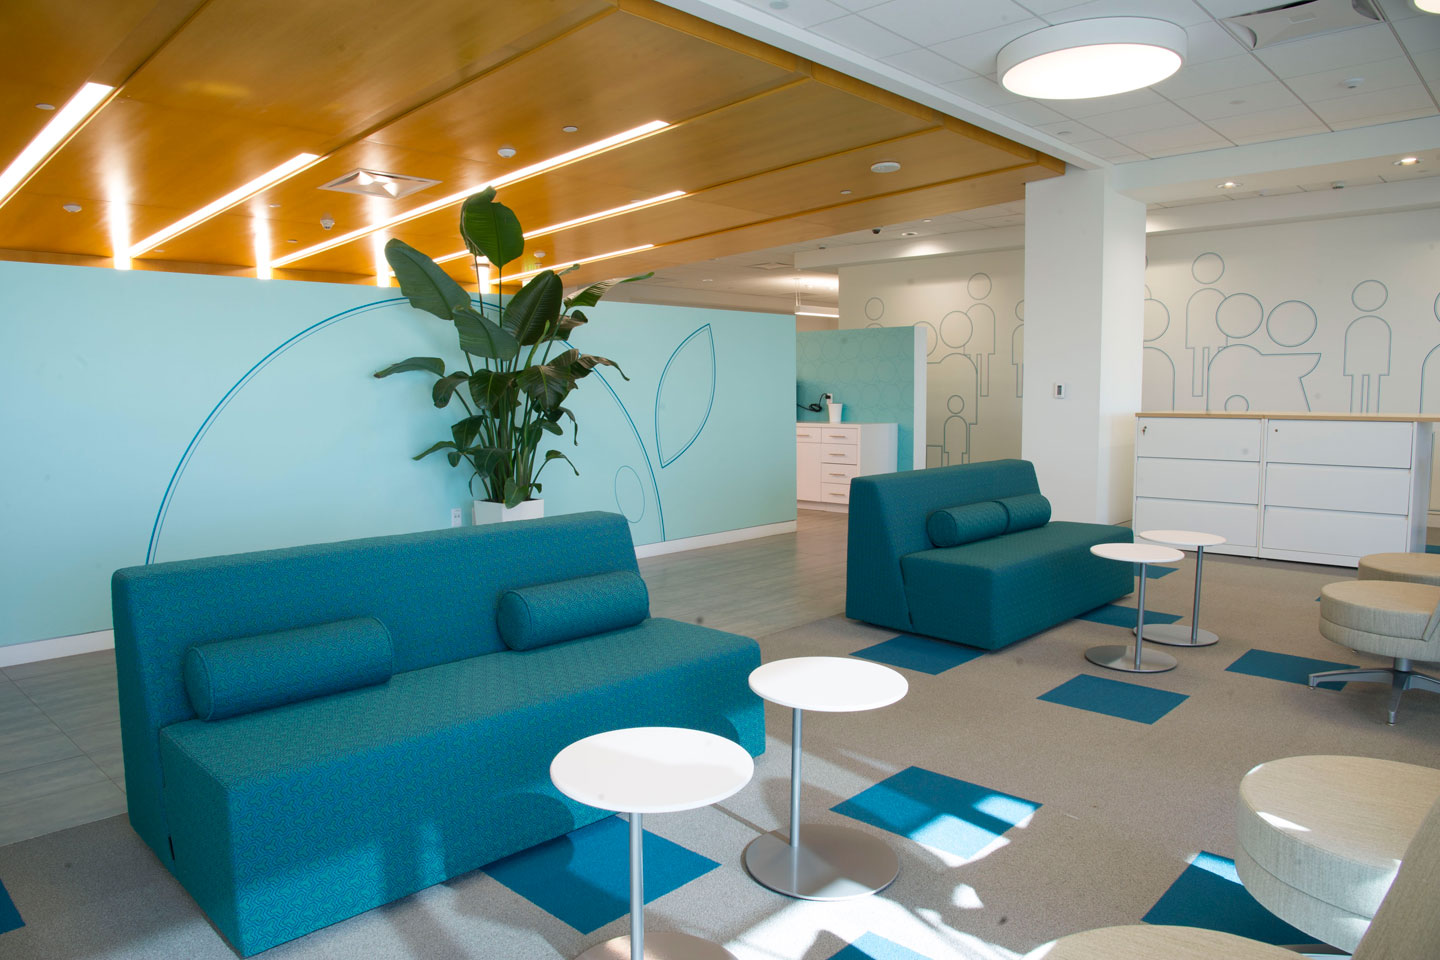 photo of the bupa office